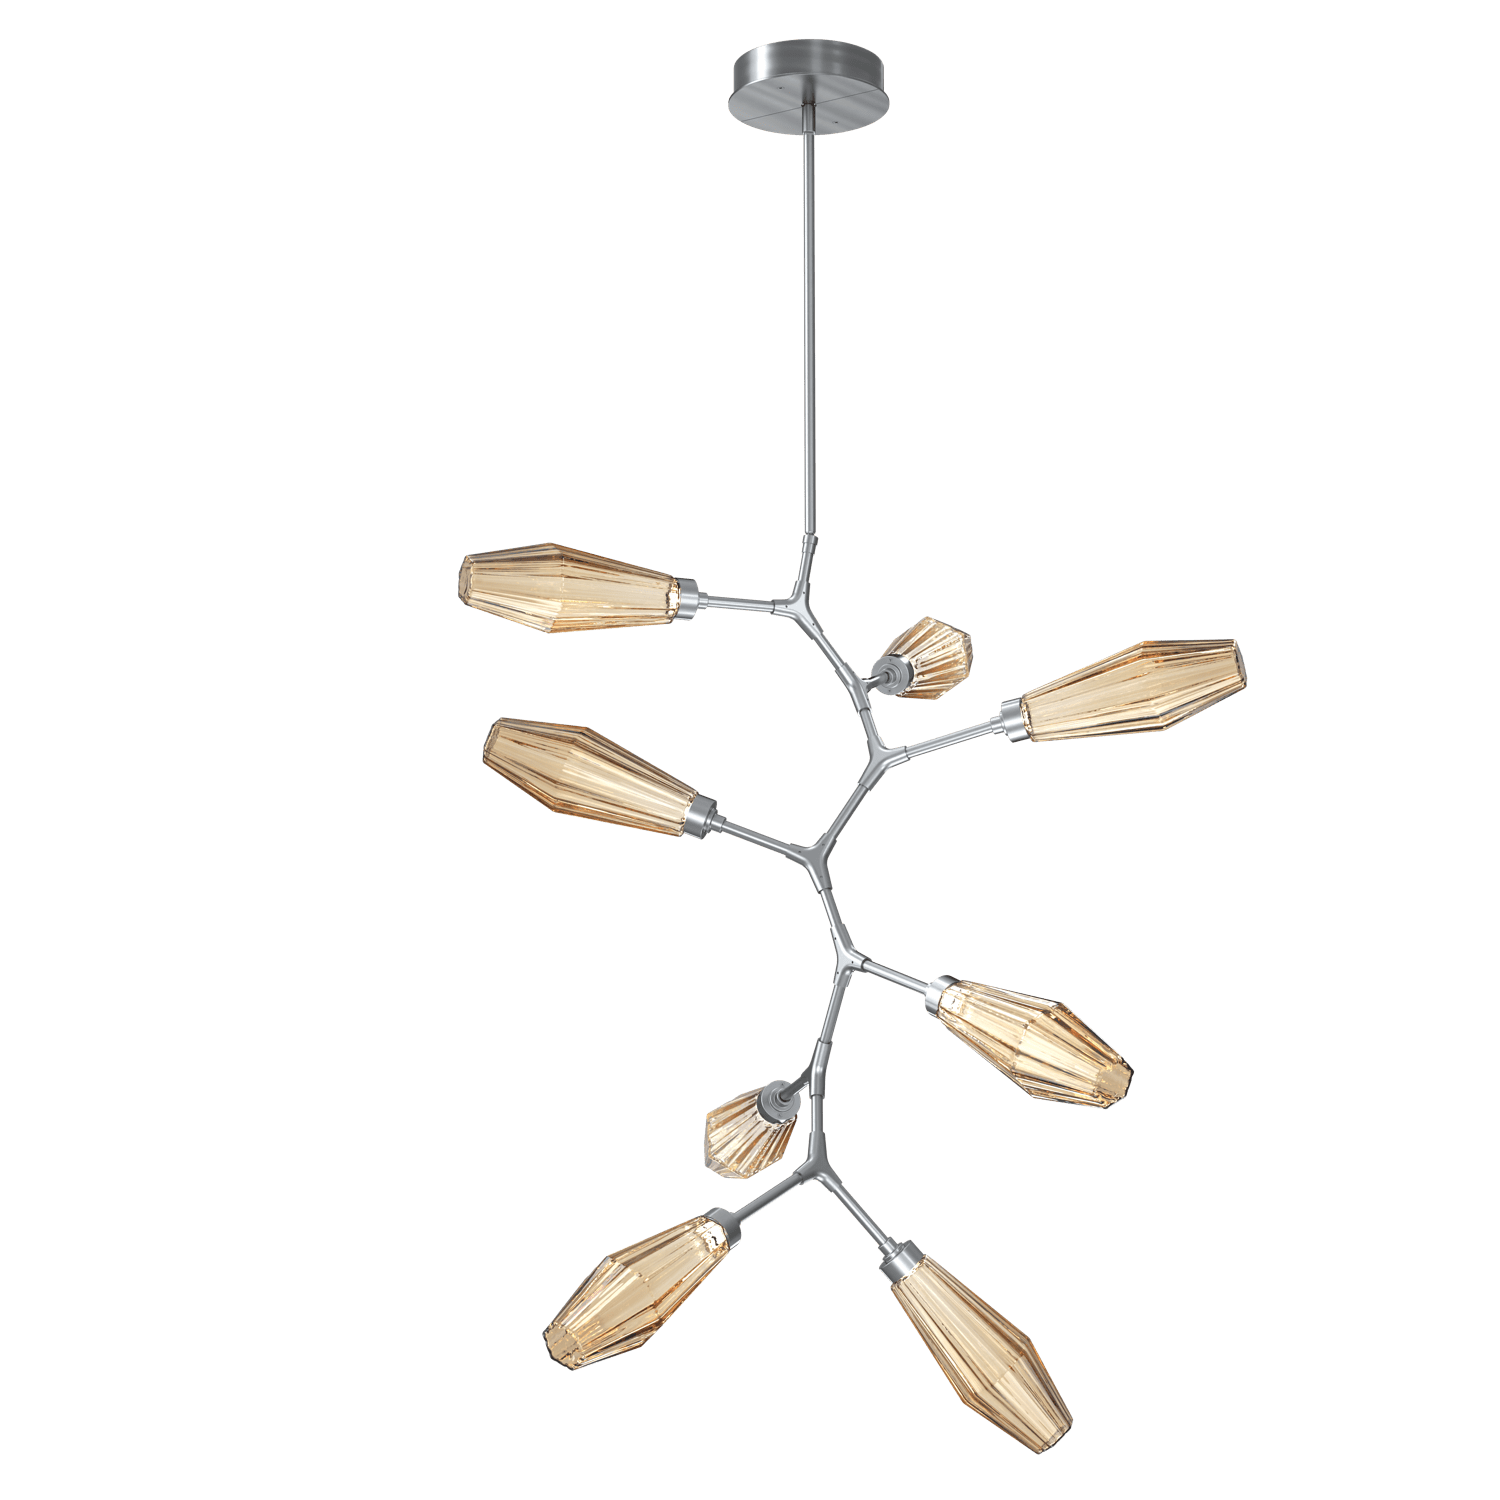 CHB0049-VB-GM-RB-Hammerton-Studio-Aalto-8-light-modern-vine-chandelier-with-gunmetal-finish-and-optic-ribbed-bronze-glass-shades-and-LED-lamping